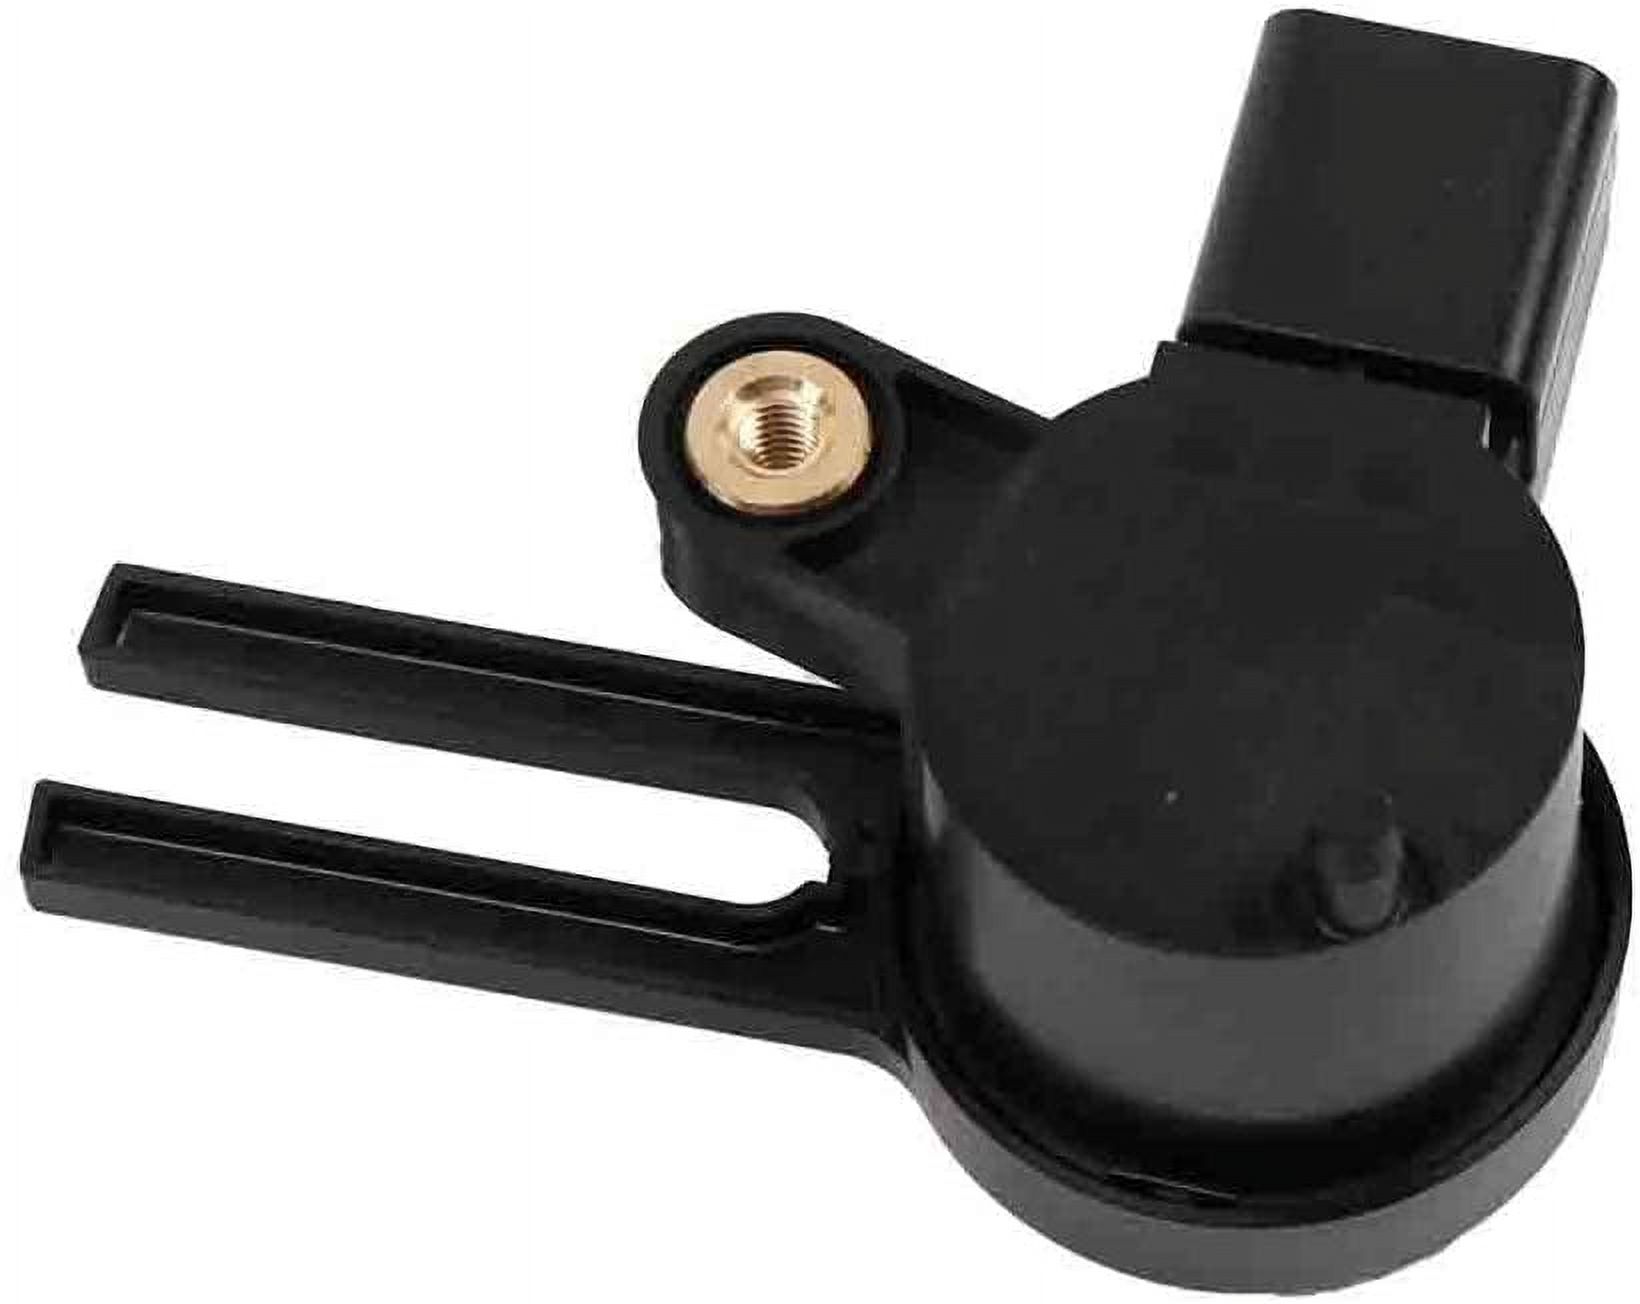 ACDelco GM Genuine Parts Brake Pedal Position Sensor Fits select: 2006-2011 CHEVROLET IMPALA, 2009-2011 CHEVROLET TRAVERSE - image 2 of 2